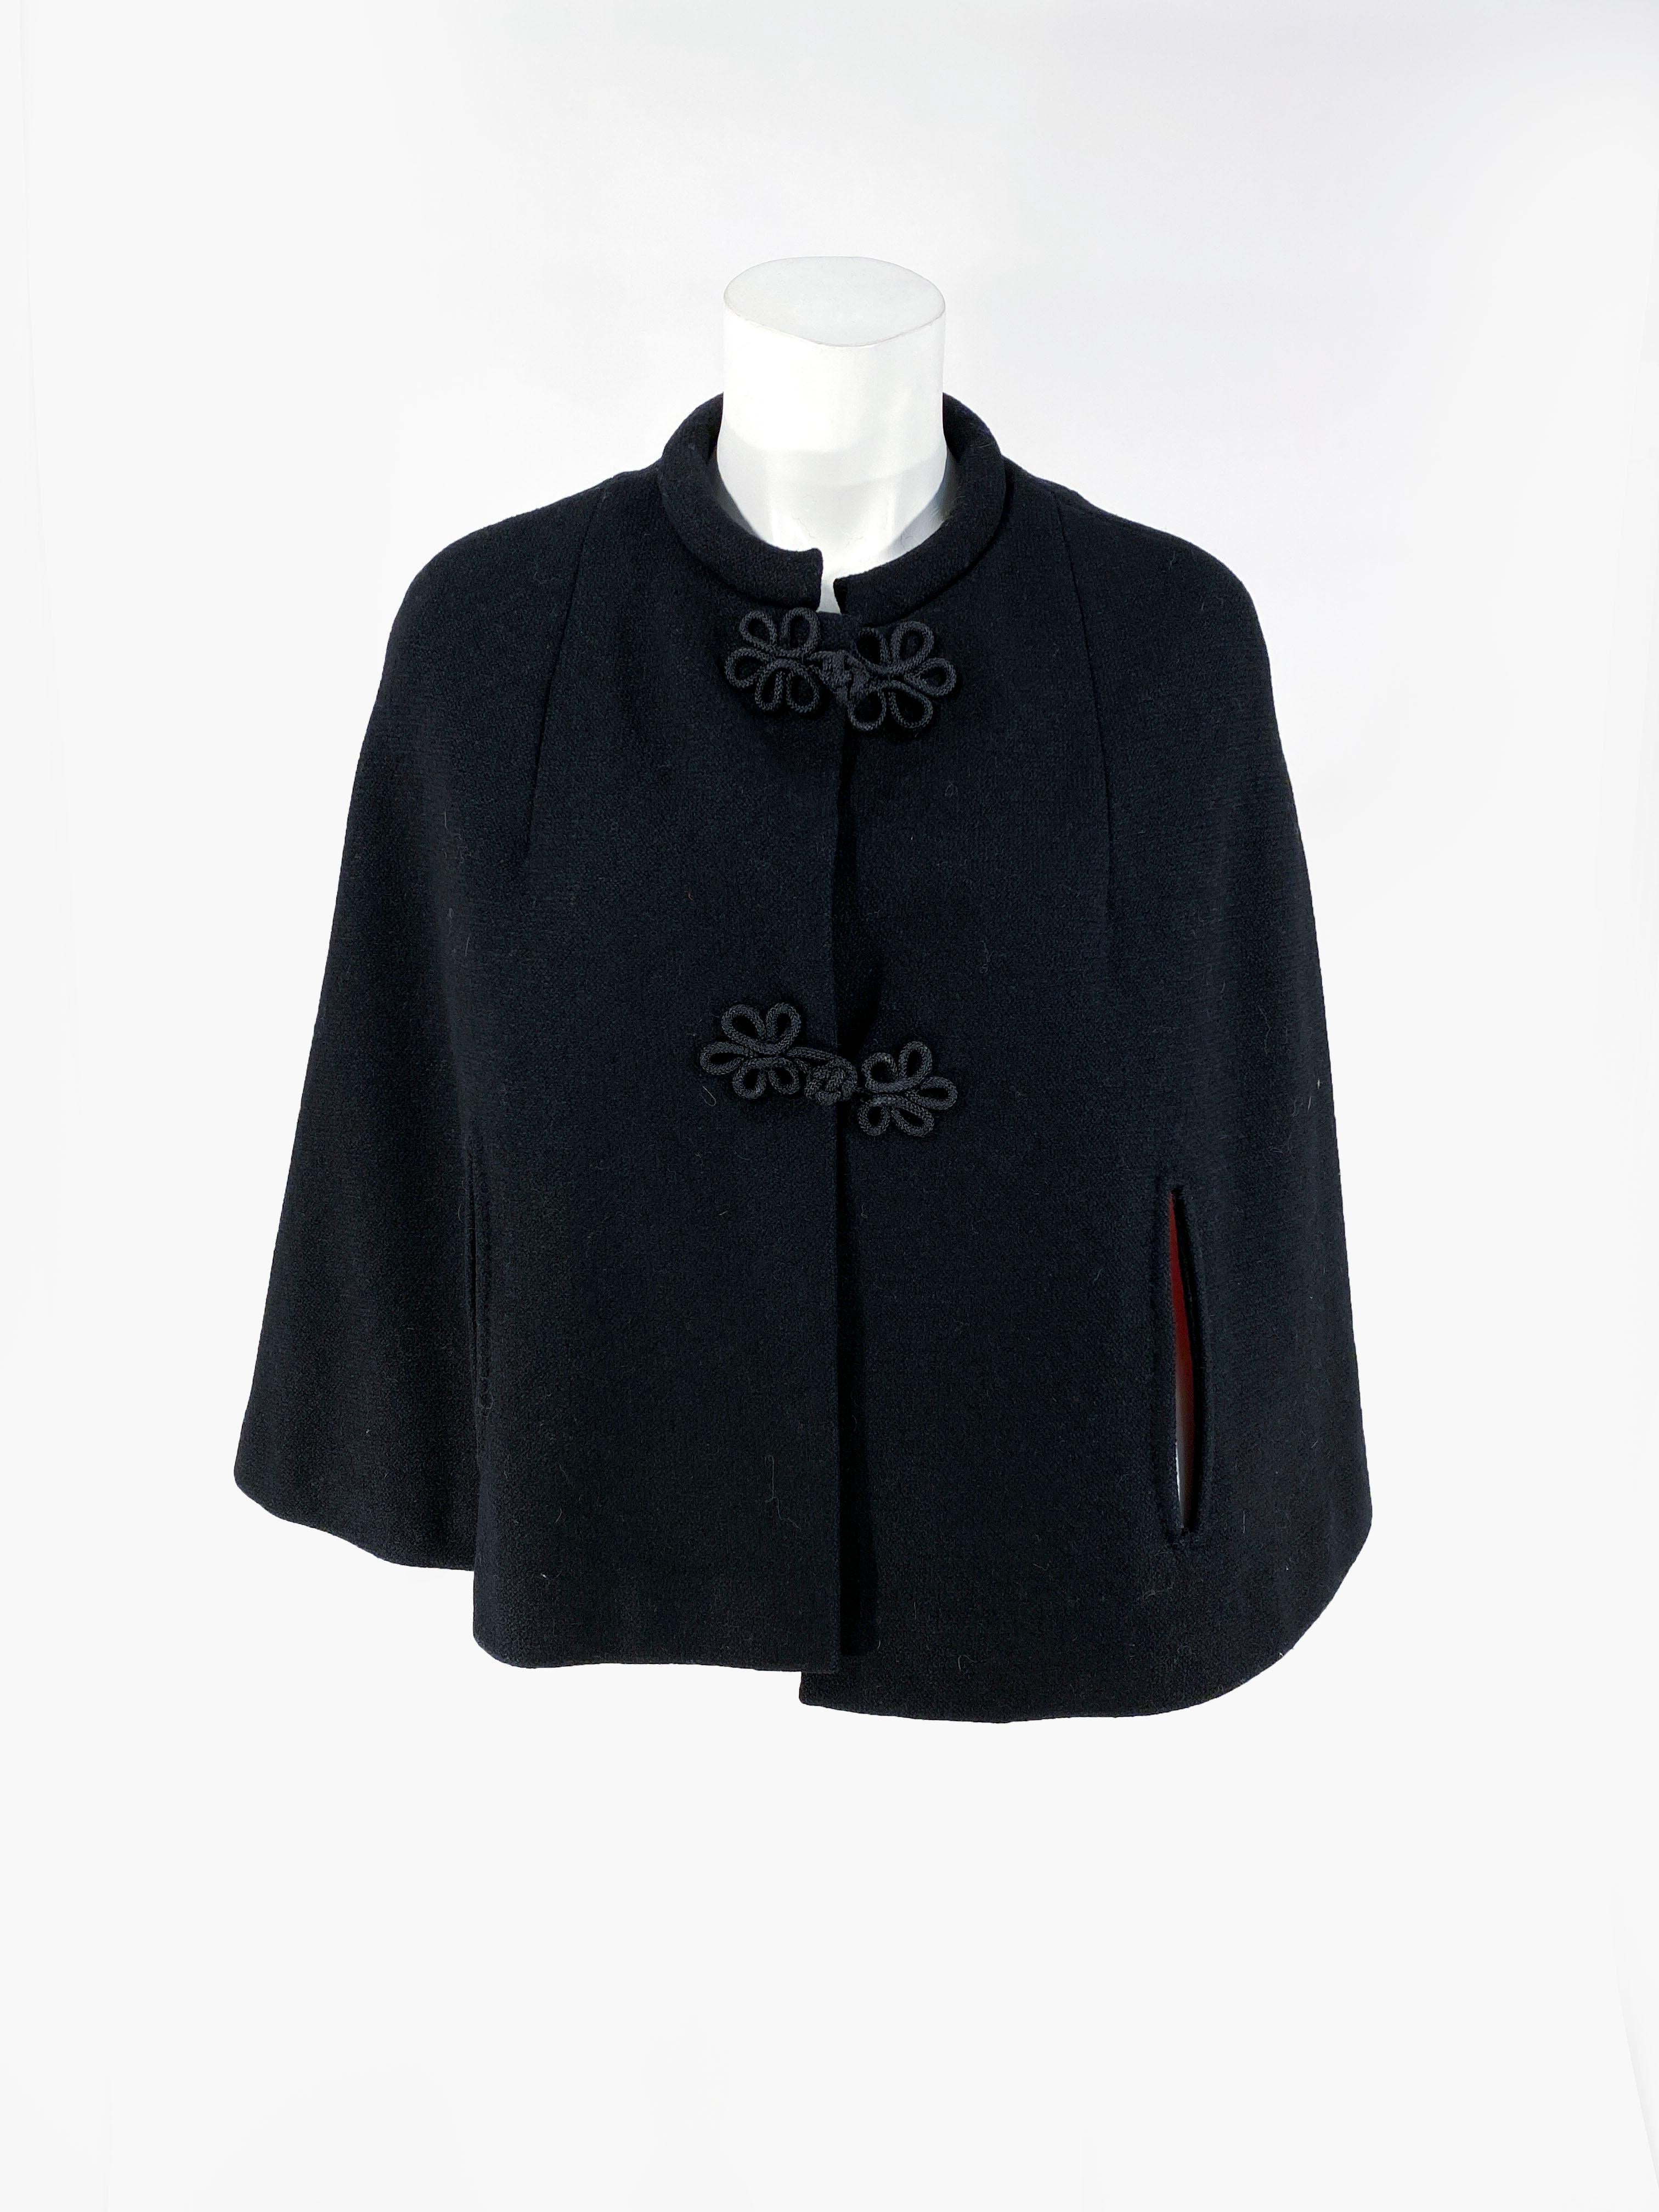 1960s black wool caplet with a vibrant red satin lining. This piece is decorated with handmade cord frogs, and handset are slits. The rolled collar is padded from a comfortable fit around the neck. The measurement across the shoulders is 17 inches.